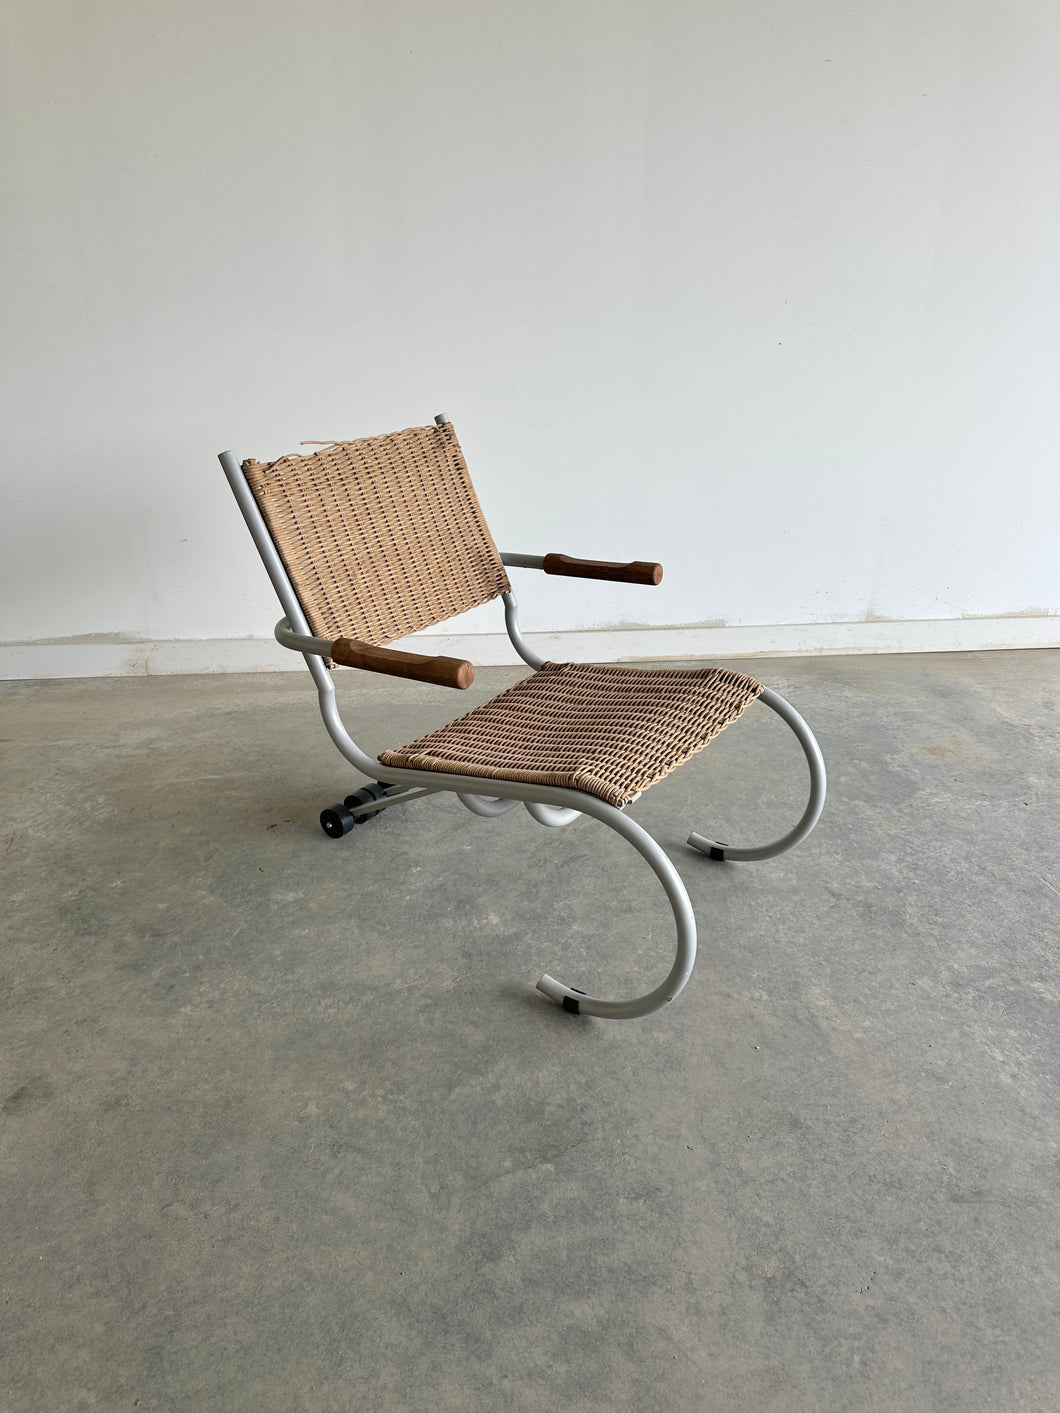 PT Skate rolling lounge chair by Paul Tuttle